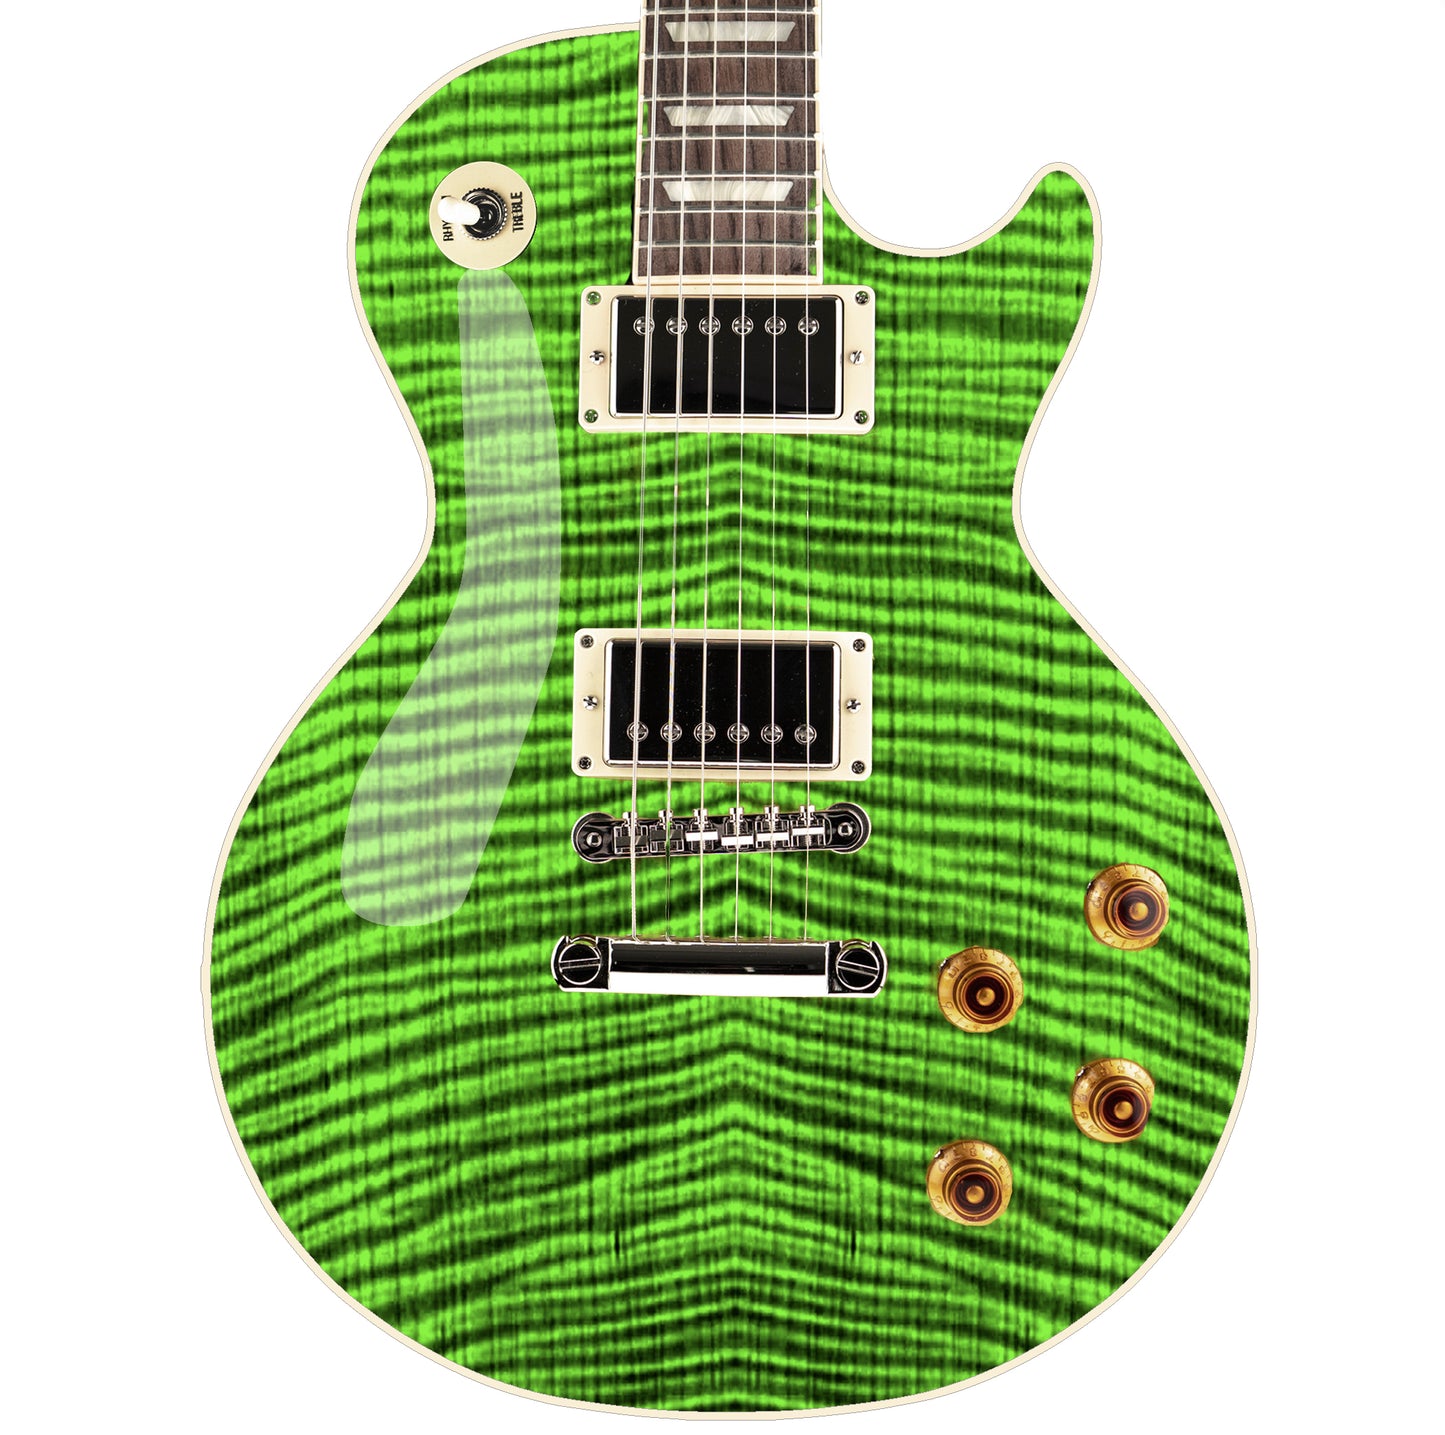 Guitar Skin Wrap Laminated Vinyl Decal Sticker The Goblin Flamed Maple GS55